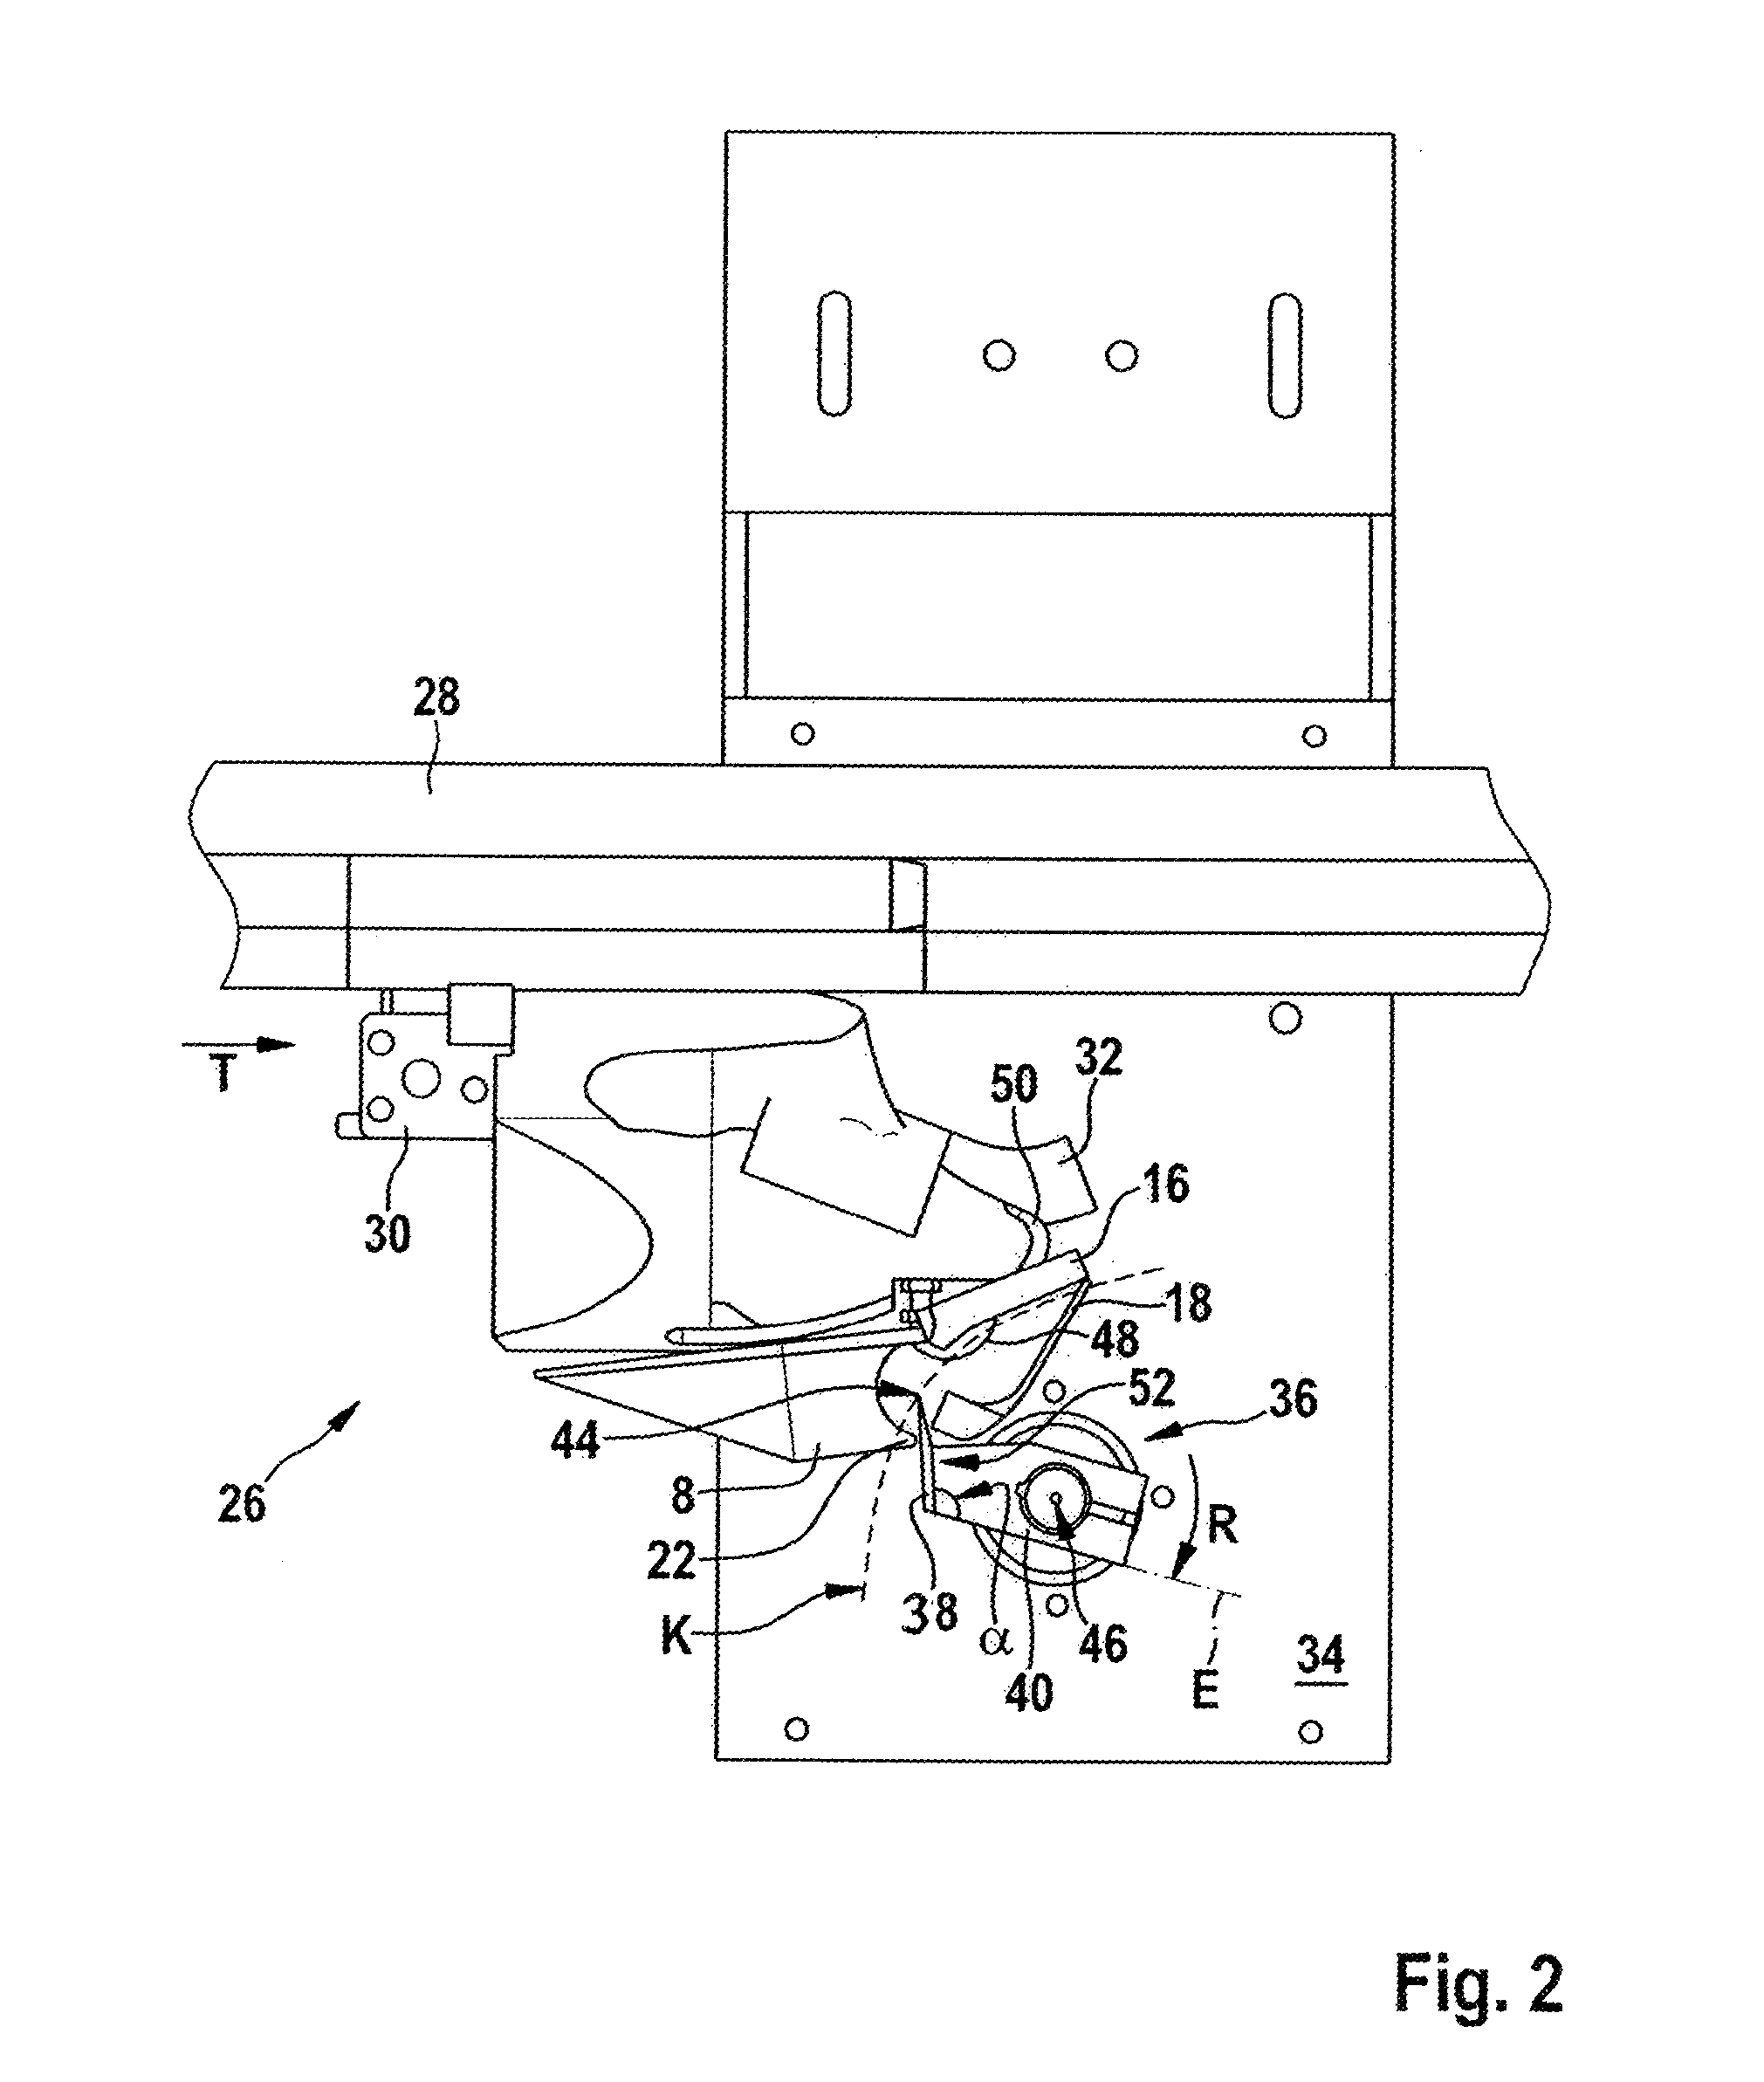 Apparatus and method for separating the wishbone from eviscerated poultry carcasses